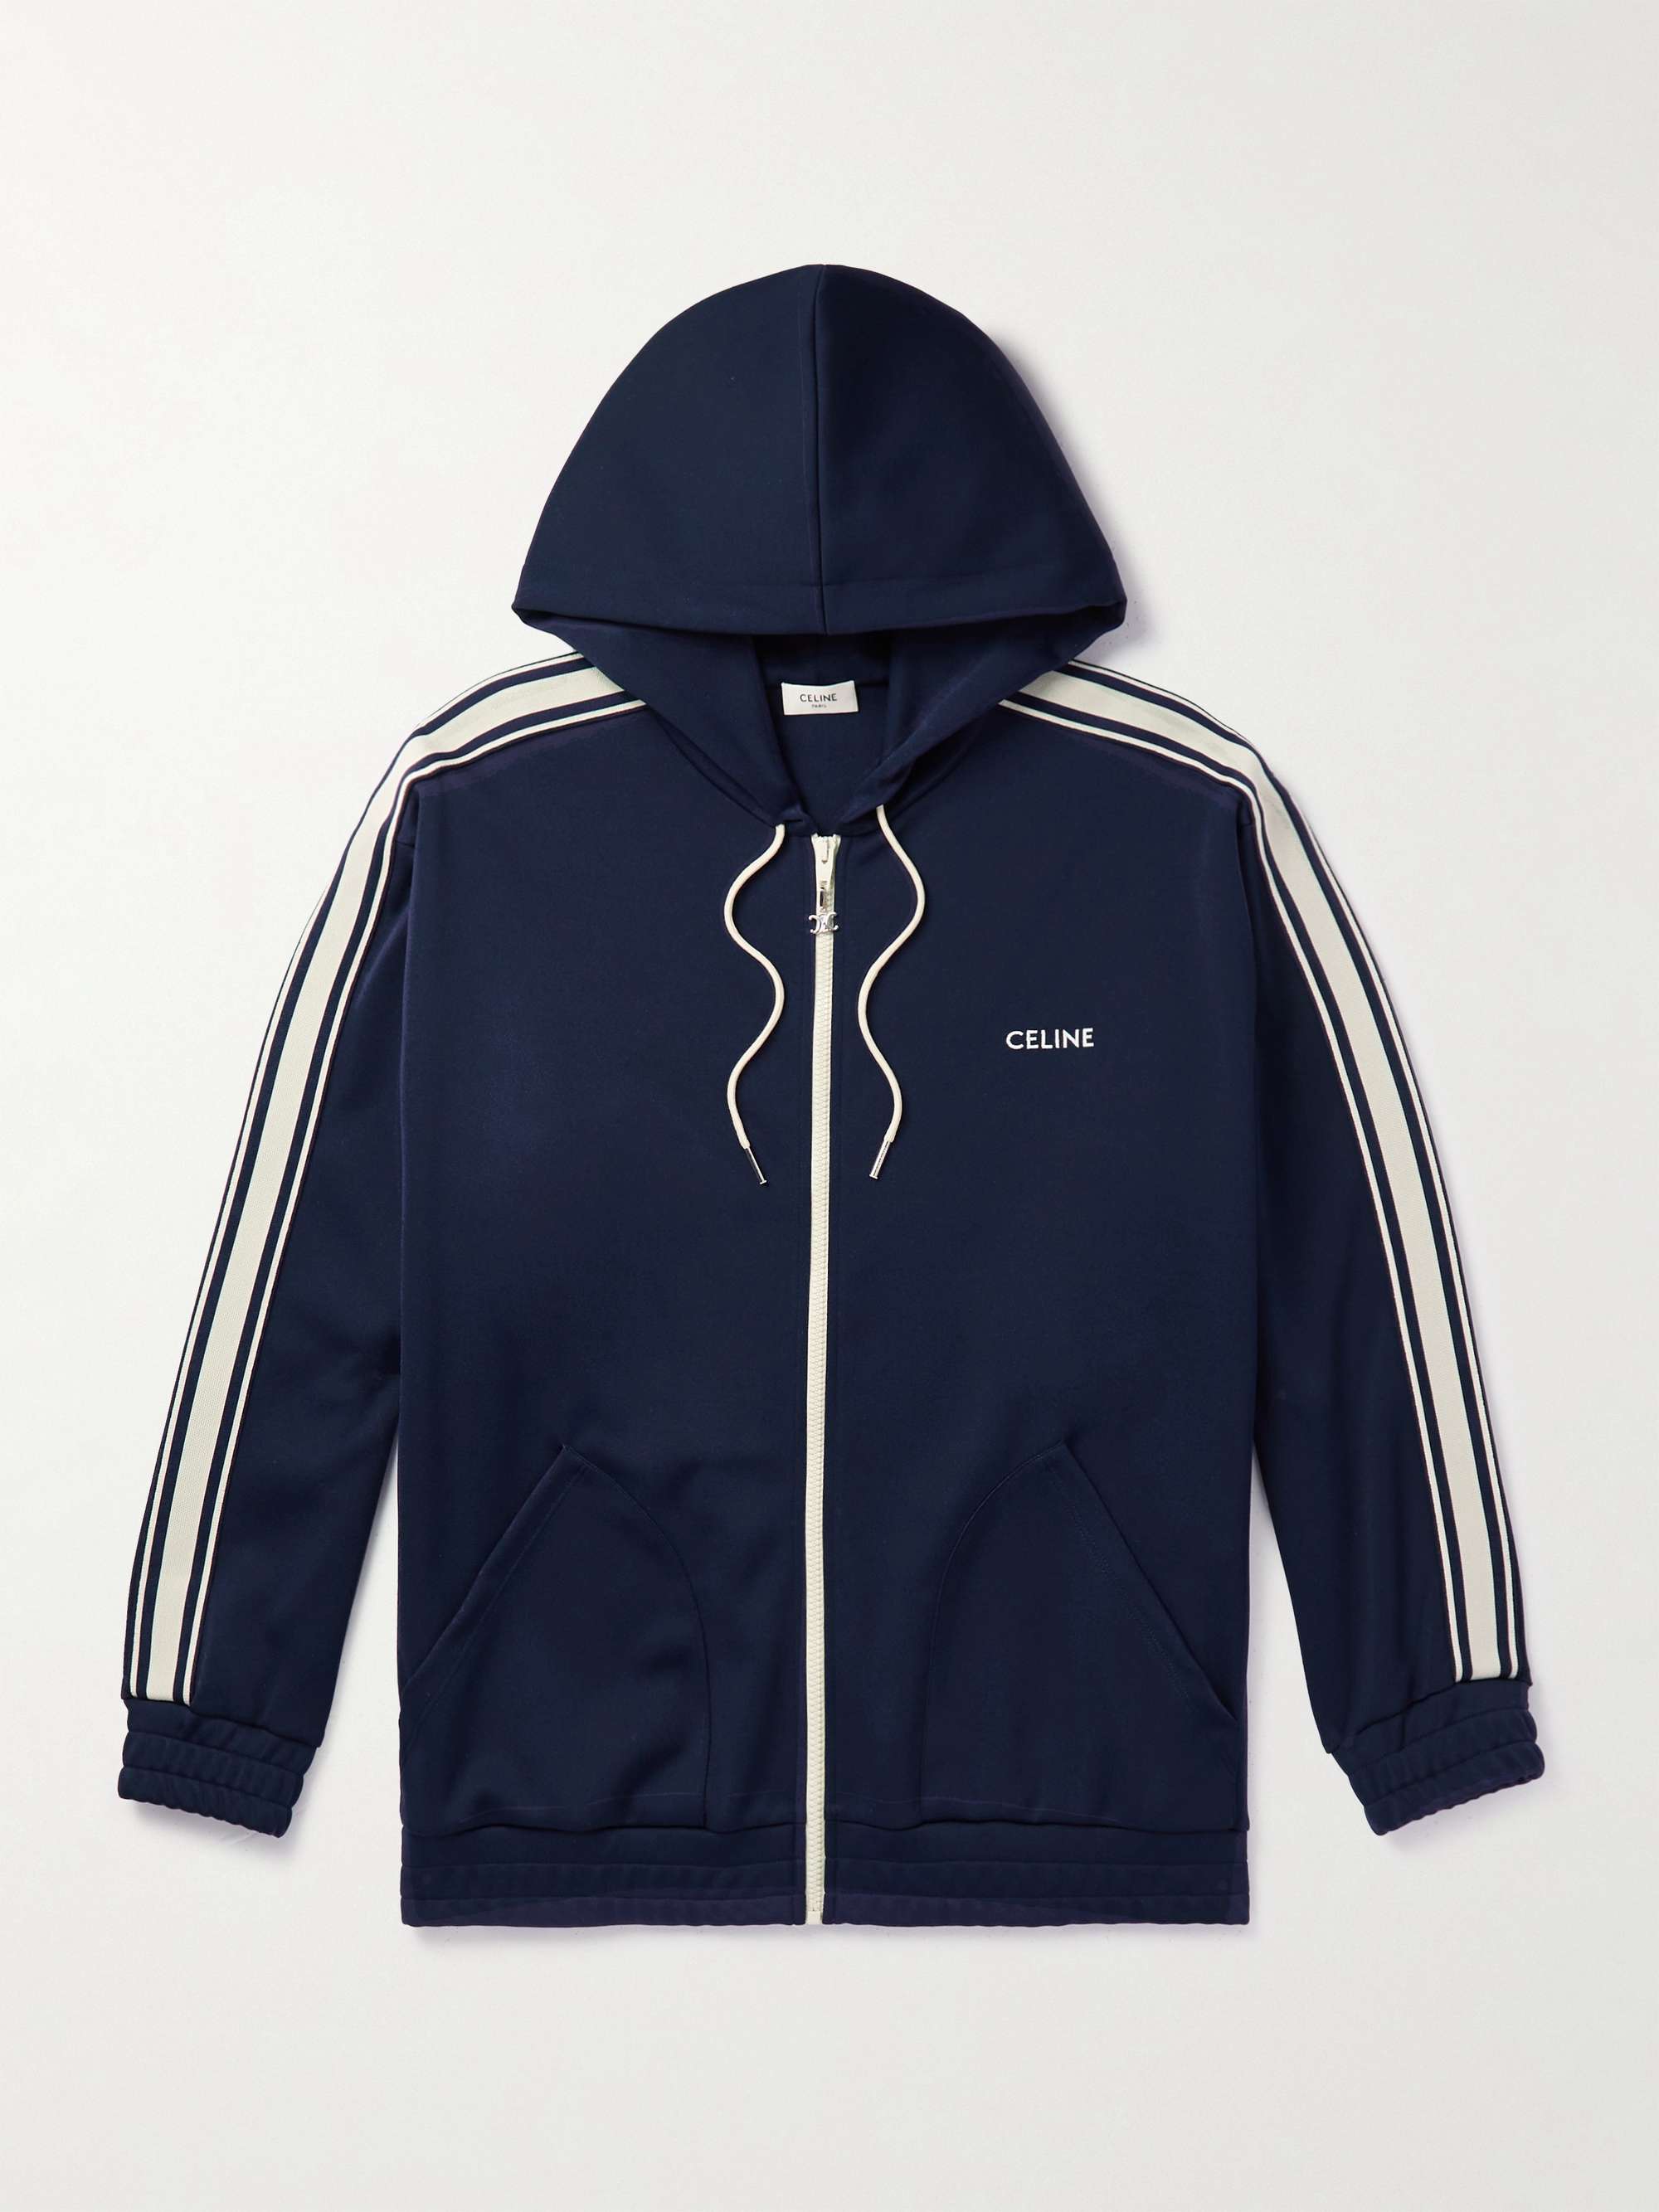 CELINE Logo-Embroidered Striped Jersey Zip-Up Hoodie